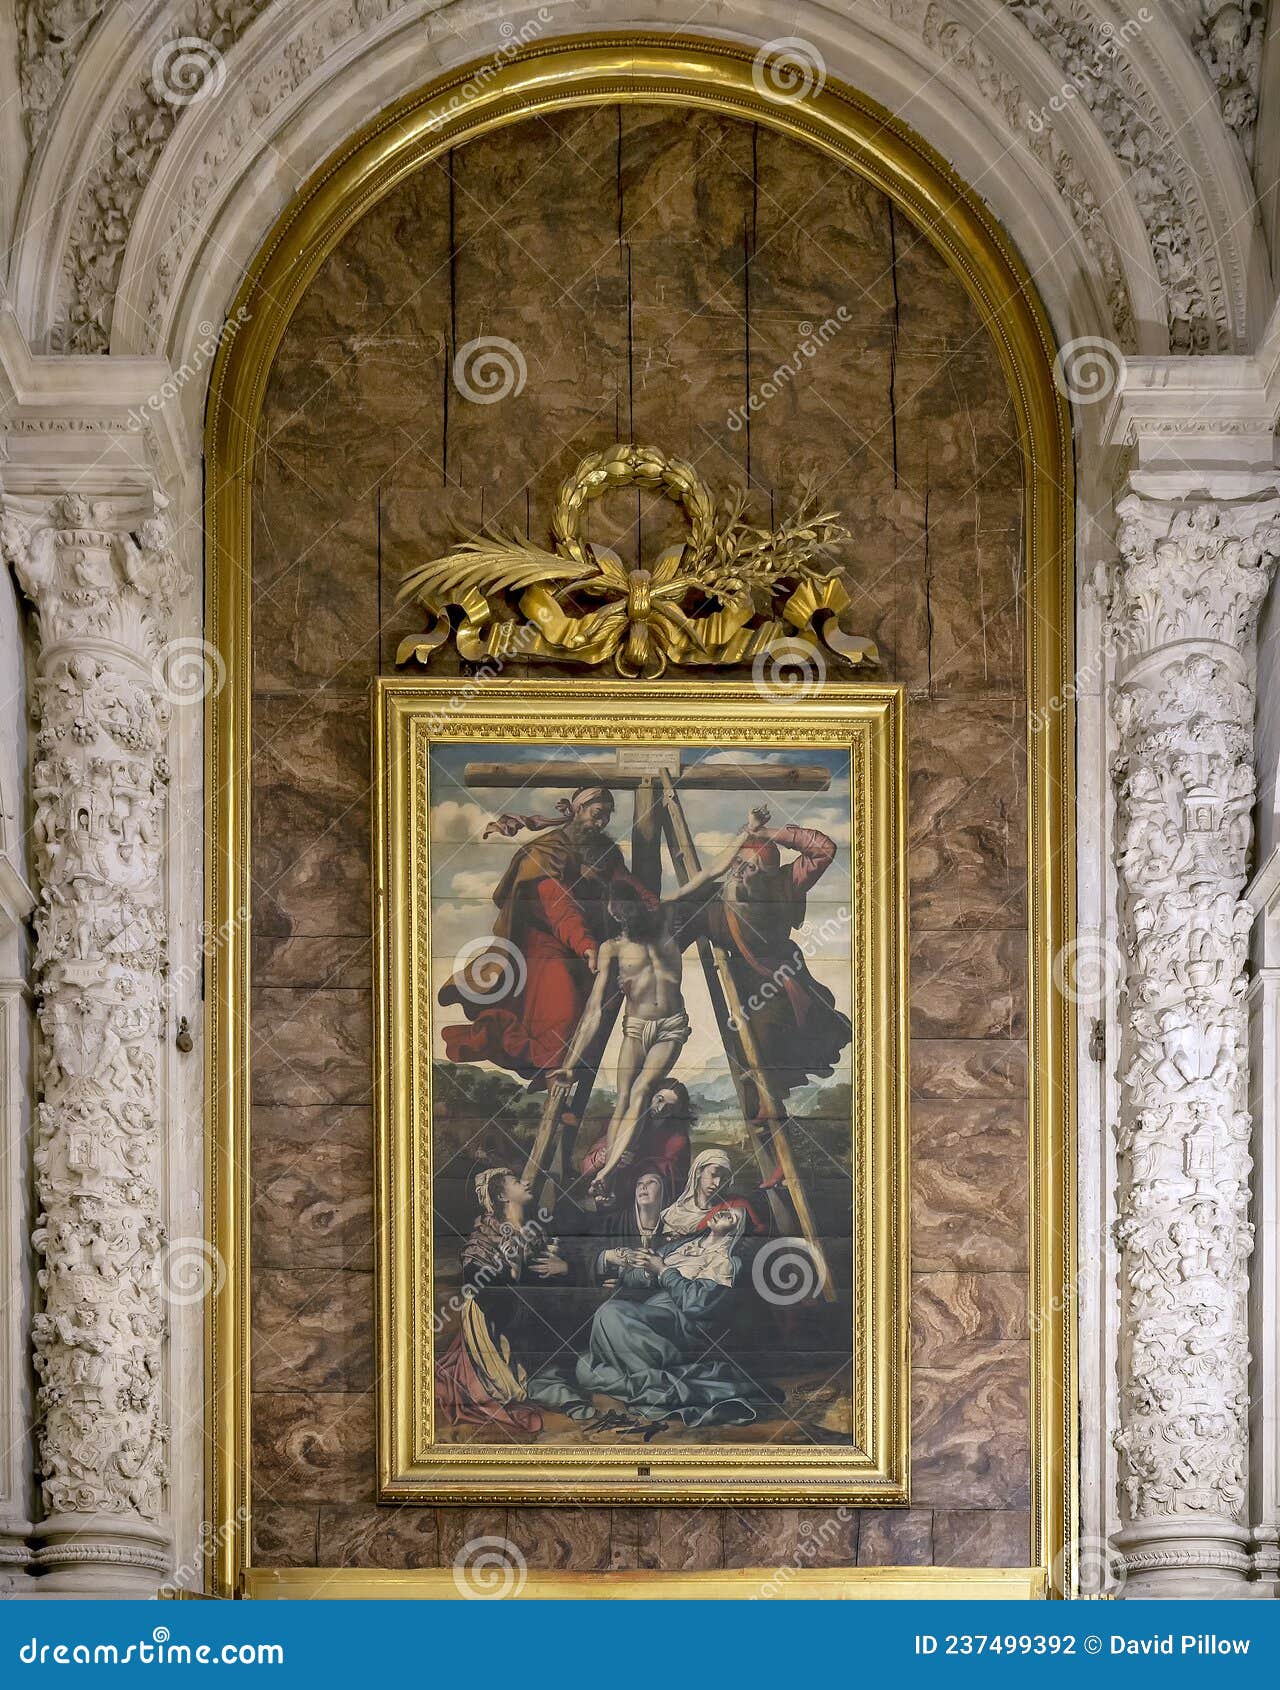 `descent from the cross` by pedro de campana in the main sacristy of the seville cathedral in spain.